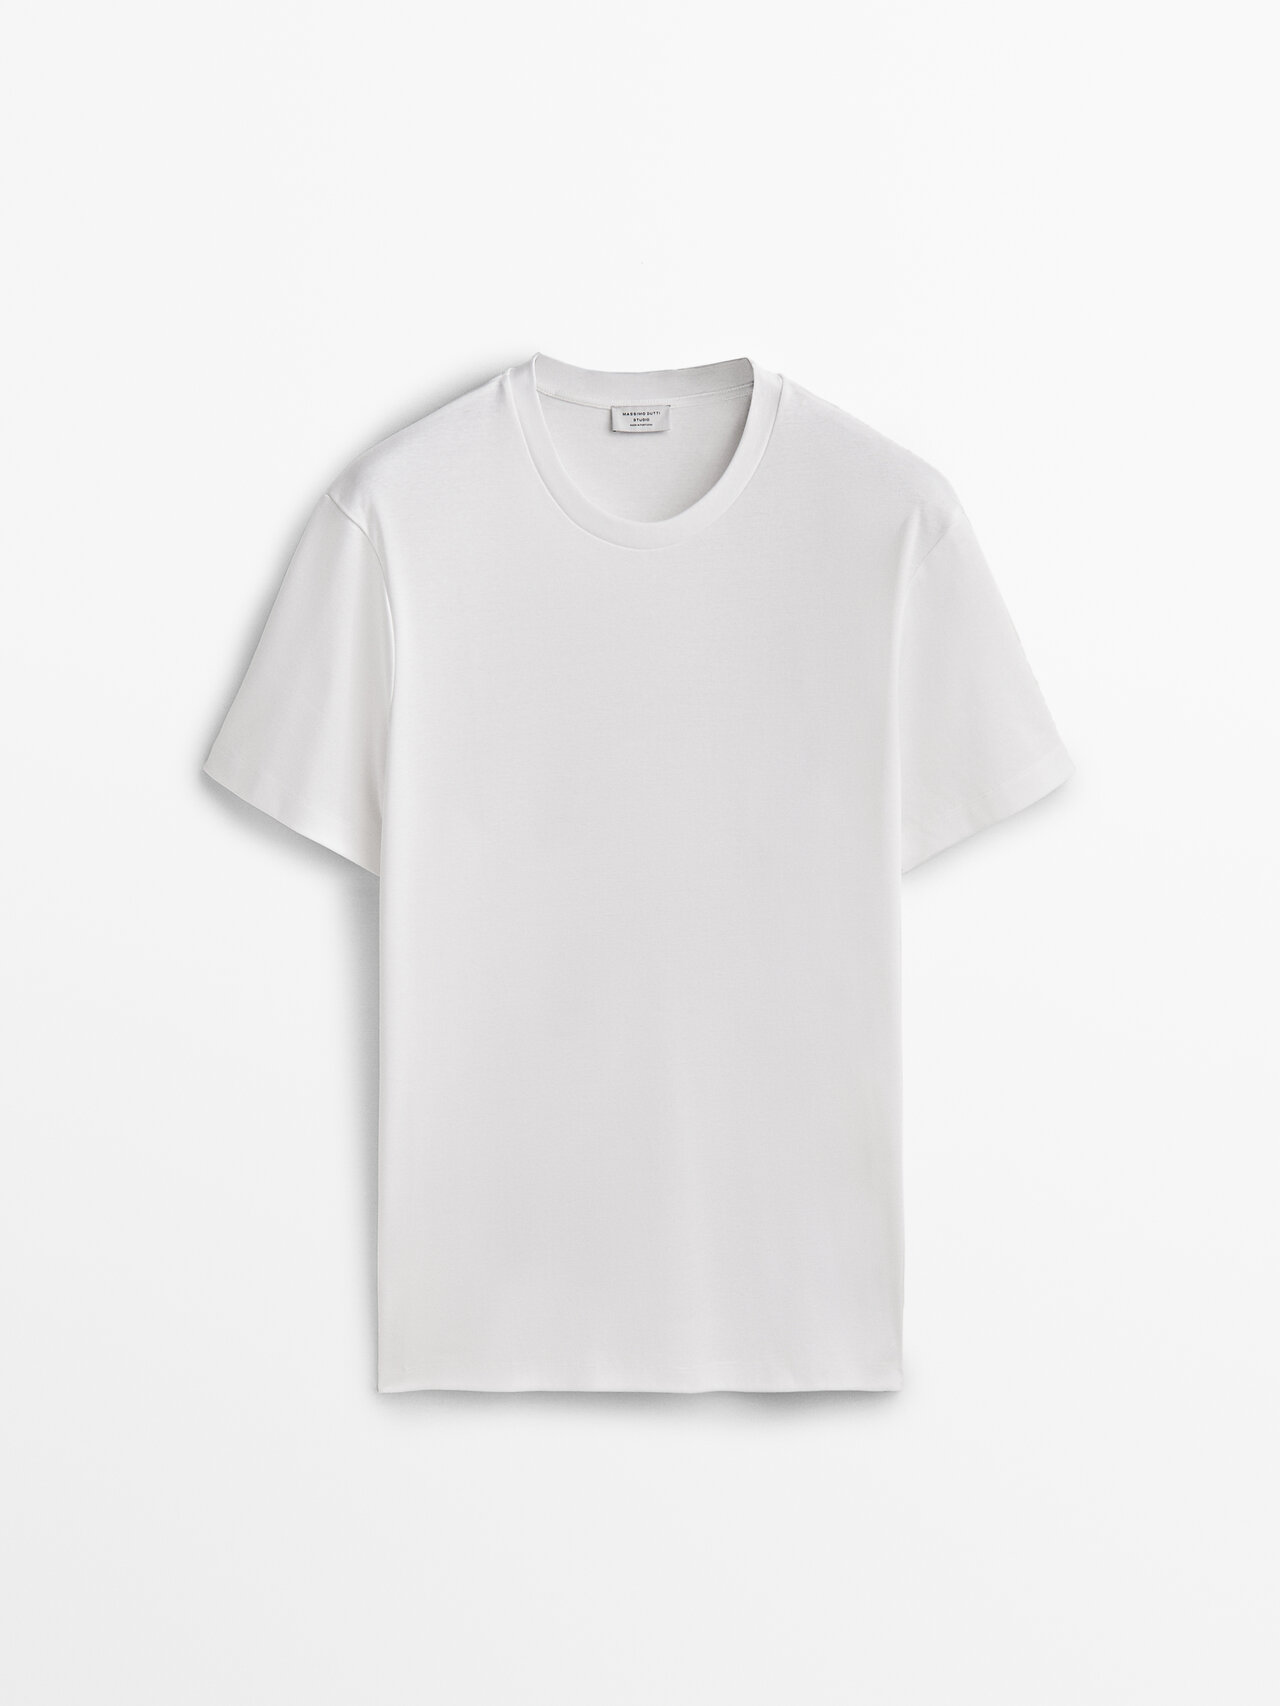 Massimo Dutti Relaxed Fit Short Sleeve Cotton T-shirt - Studio In White